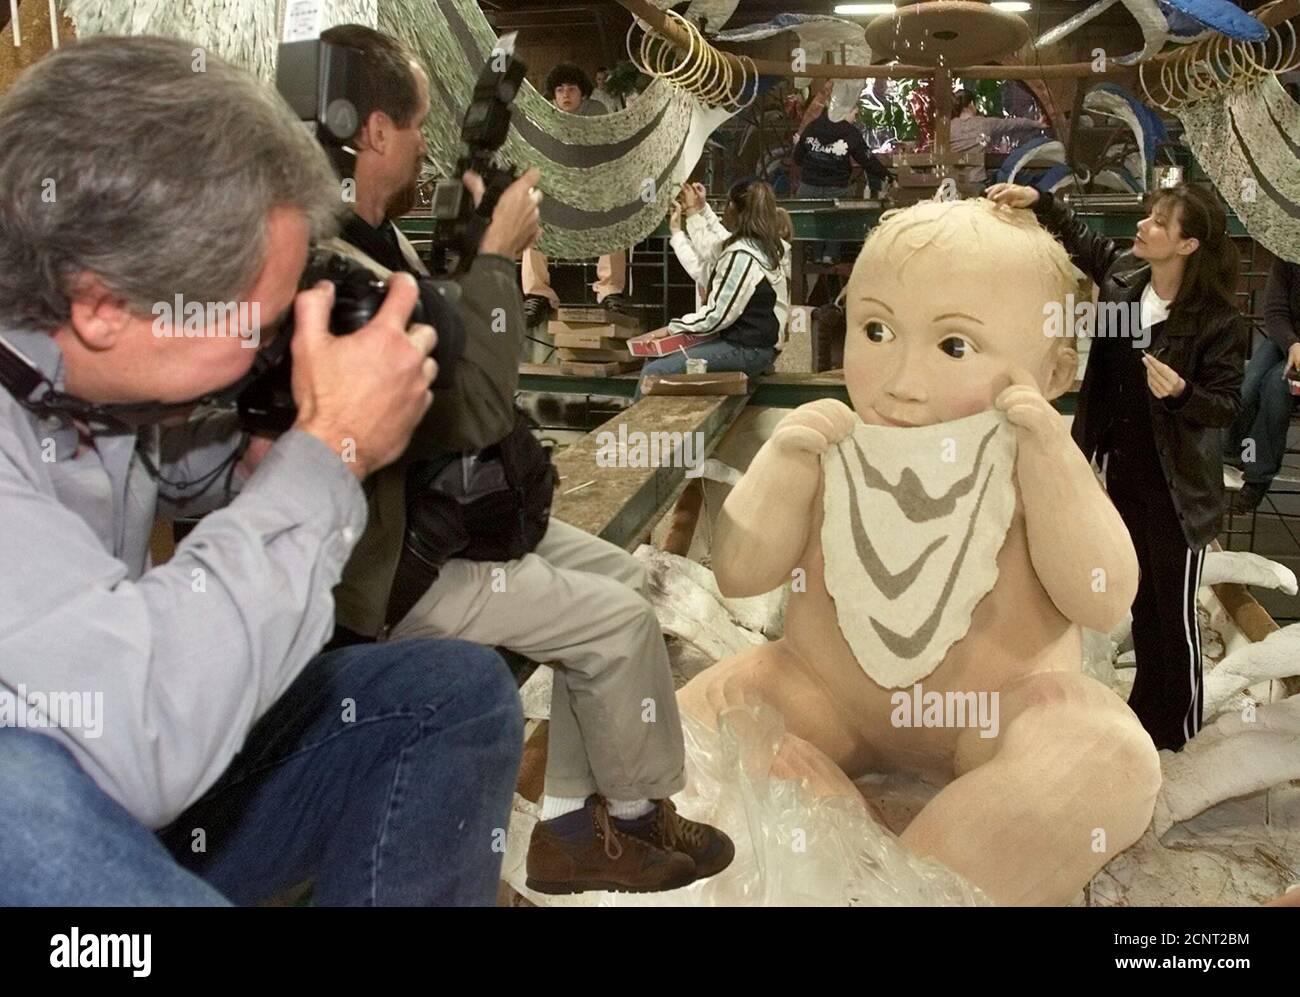 Soap opera actress Nancy Lee Grahn from the series 'General Hospital' works a baby character on the Ivory Soap float December 28, 2001 in Pasadena as photographers take pictues perched on scaffolding. The float featues a classic bath time scene based on Ivory soap advertising from the early 1900's. The float will be featured in the Tournament of Roses parade on New Year's Day 2002 in Pasadena. REUTERS/Fred Prouser  FSP Stock Photo